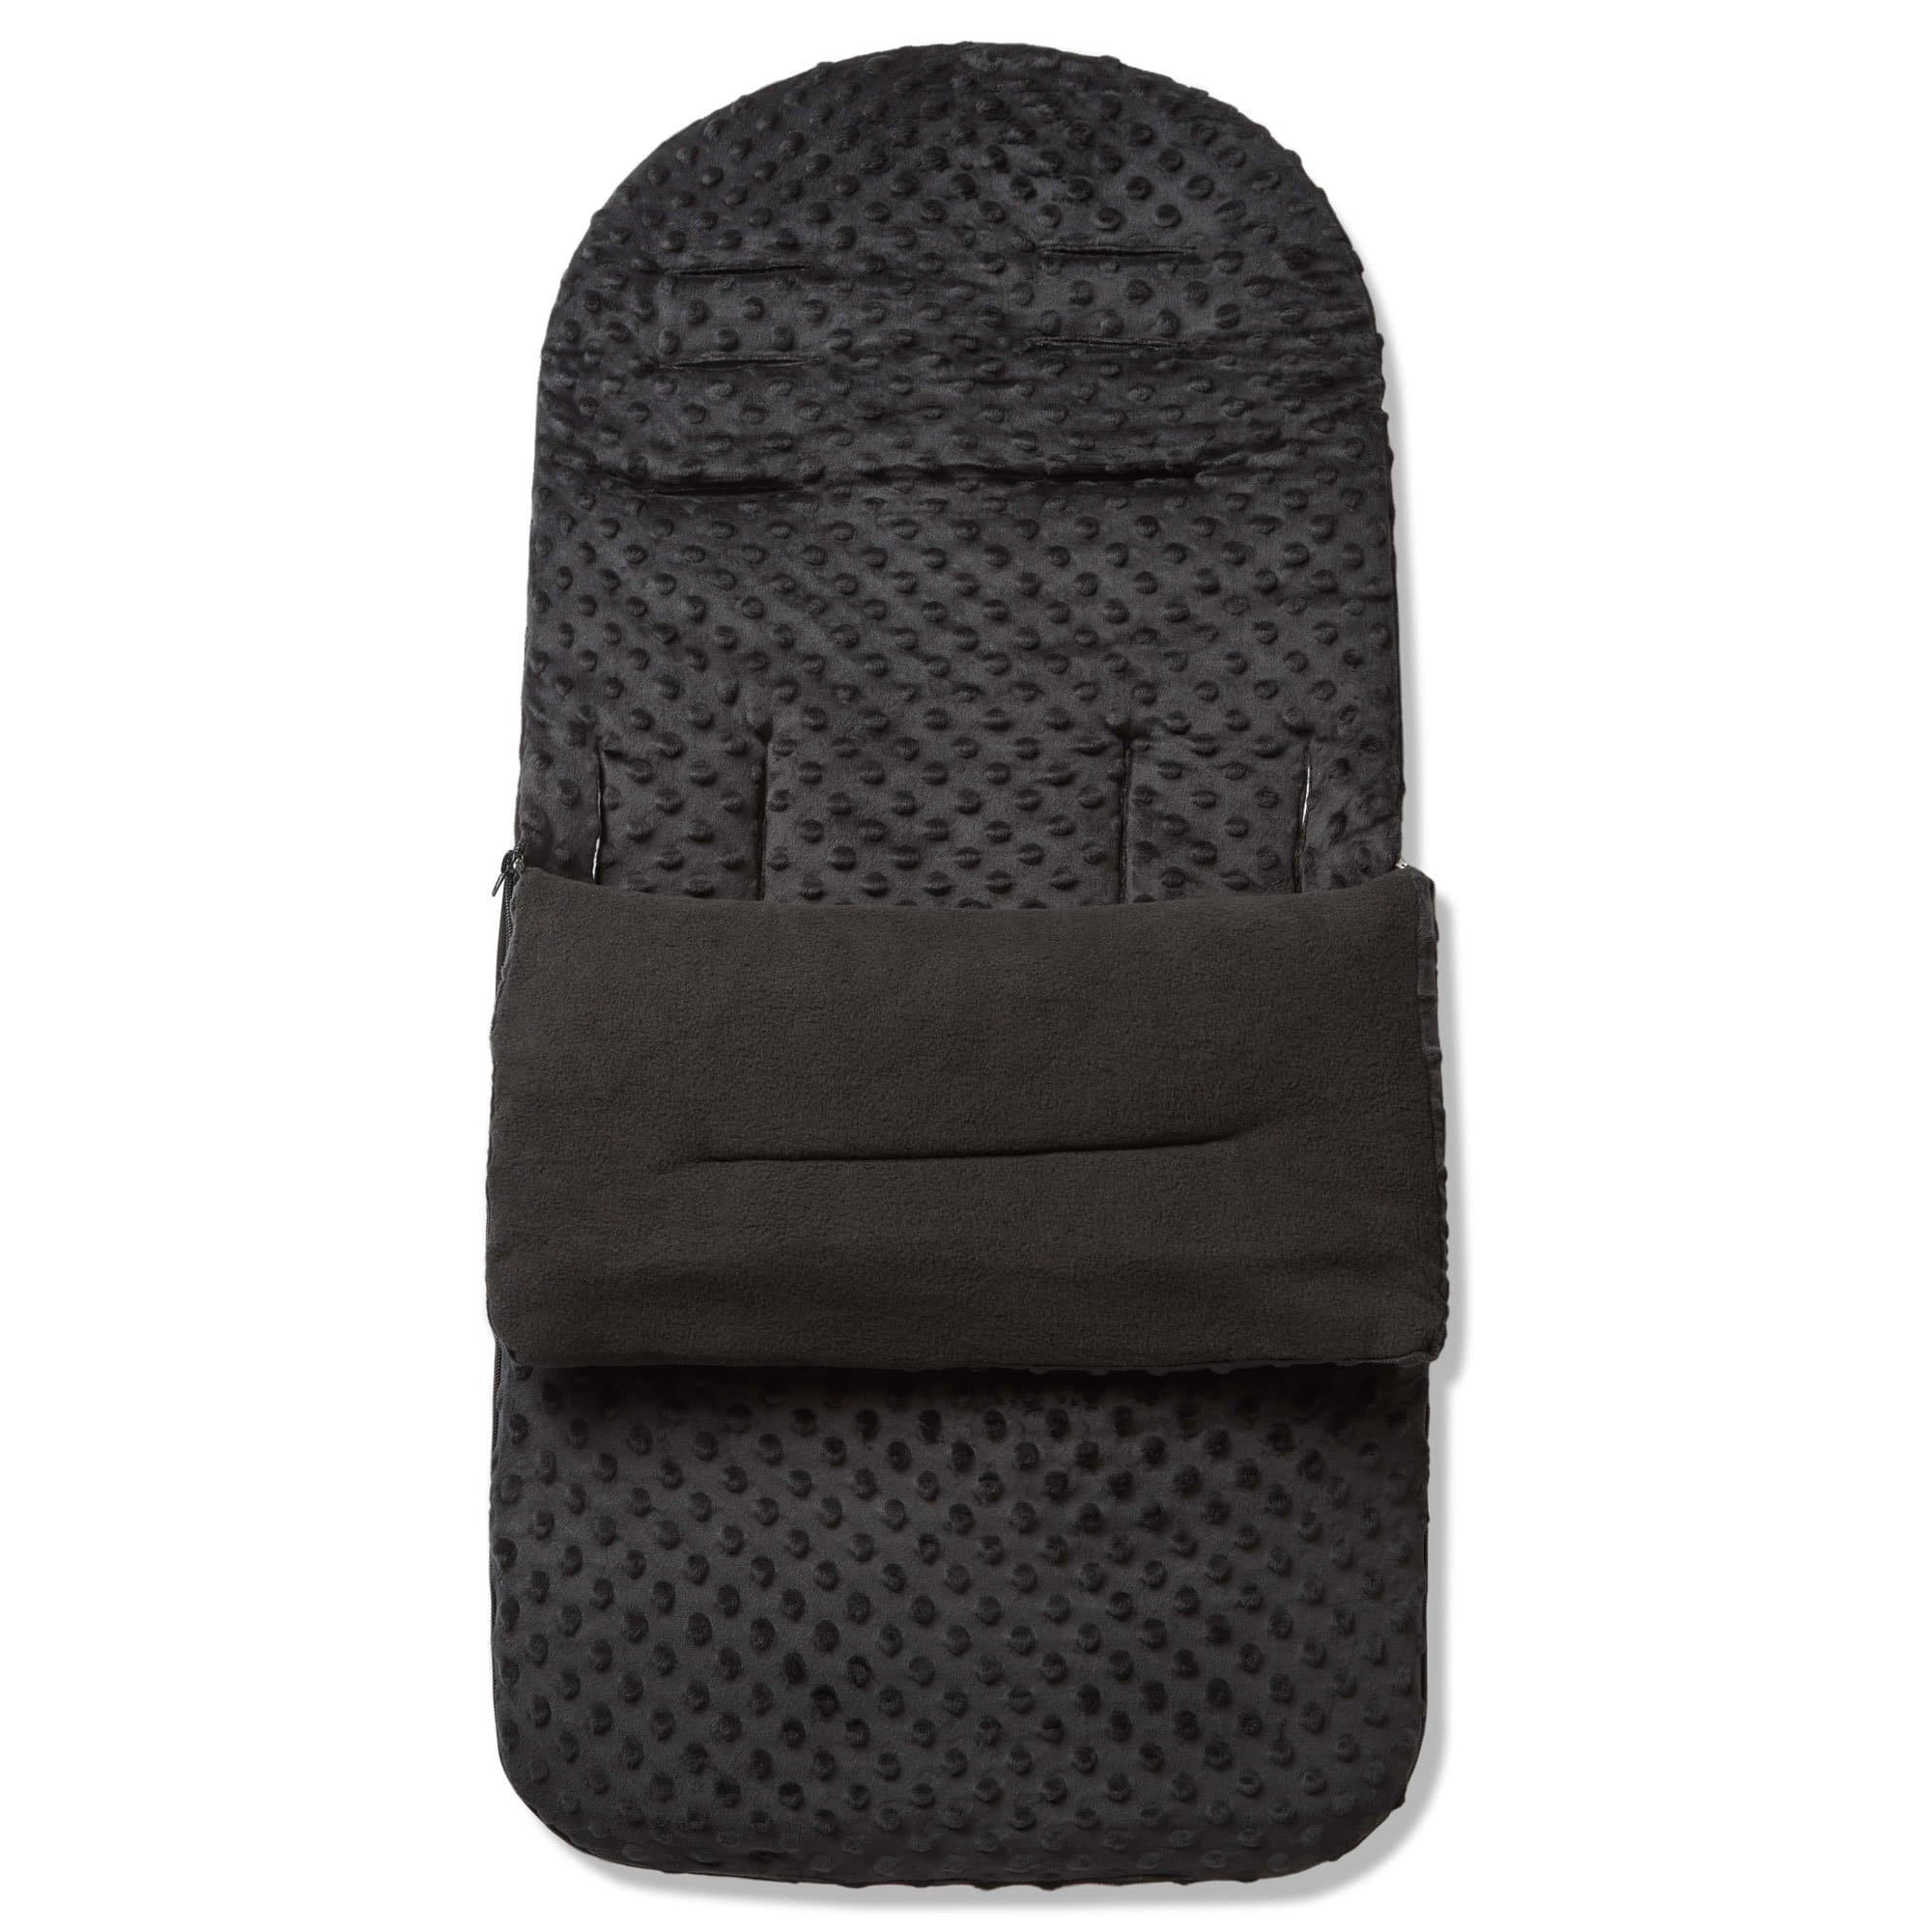 Dimple Footmuff / Cosy Toes Compatible with Uppababy - Black / Fits All Models | For Your Little One